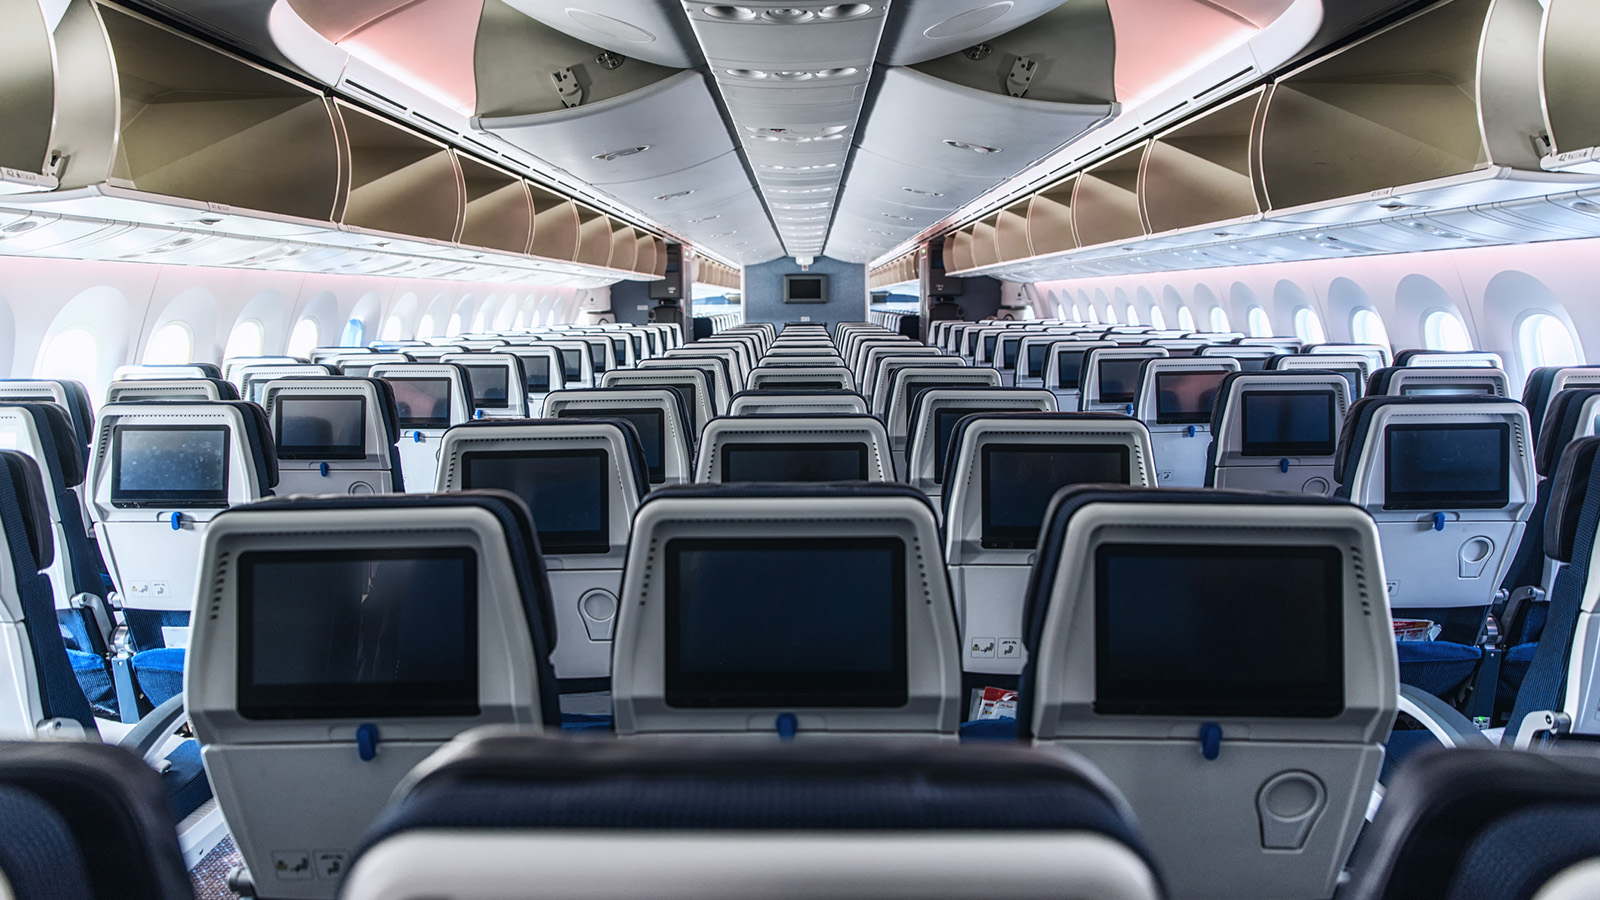 Tips for long flights: How to survive long haul in economy